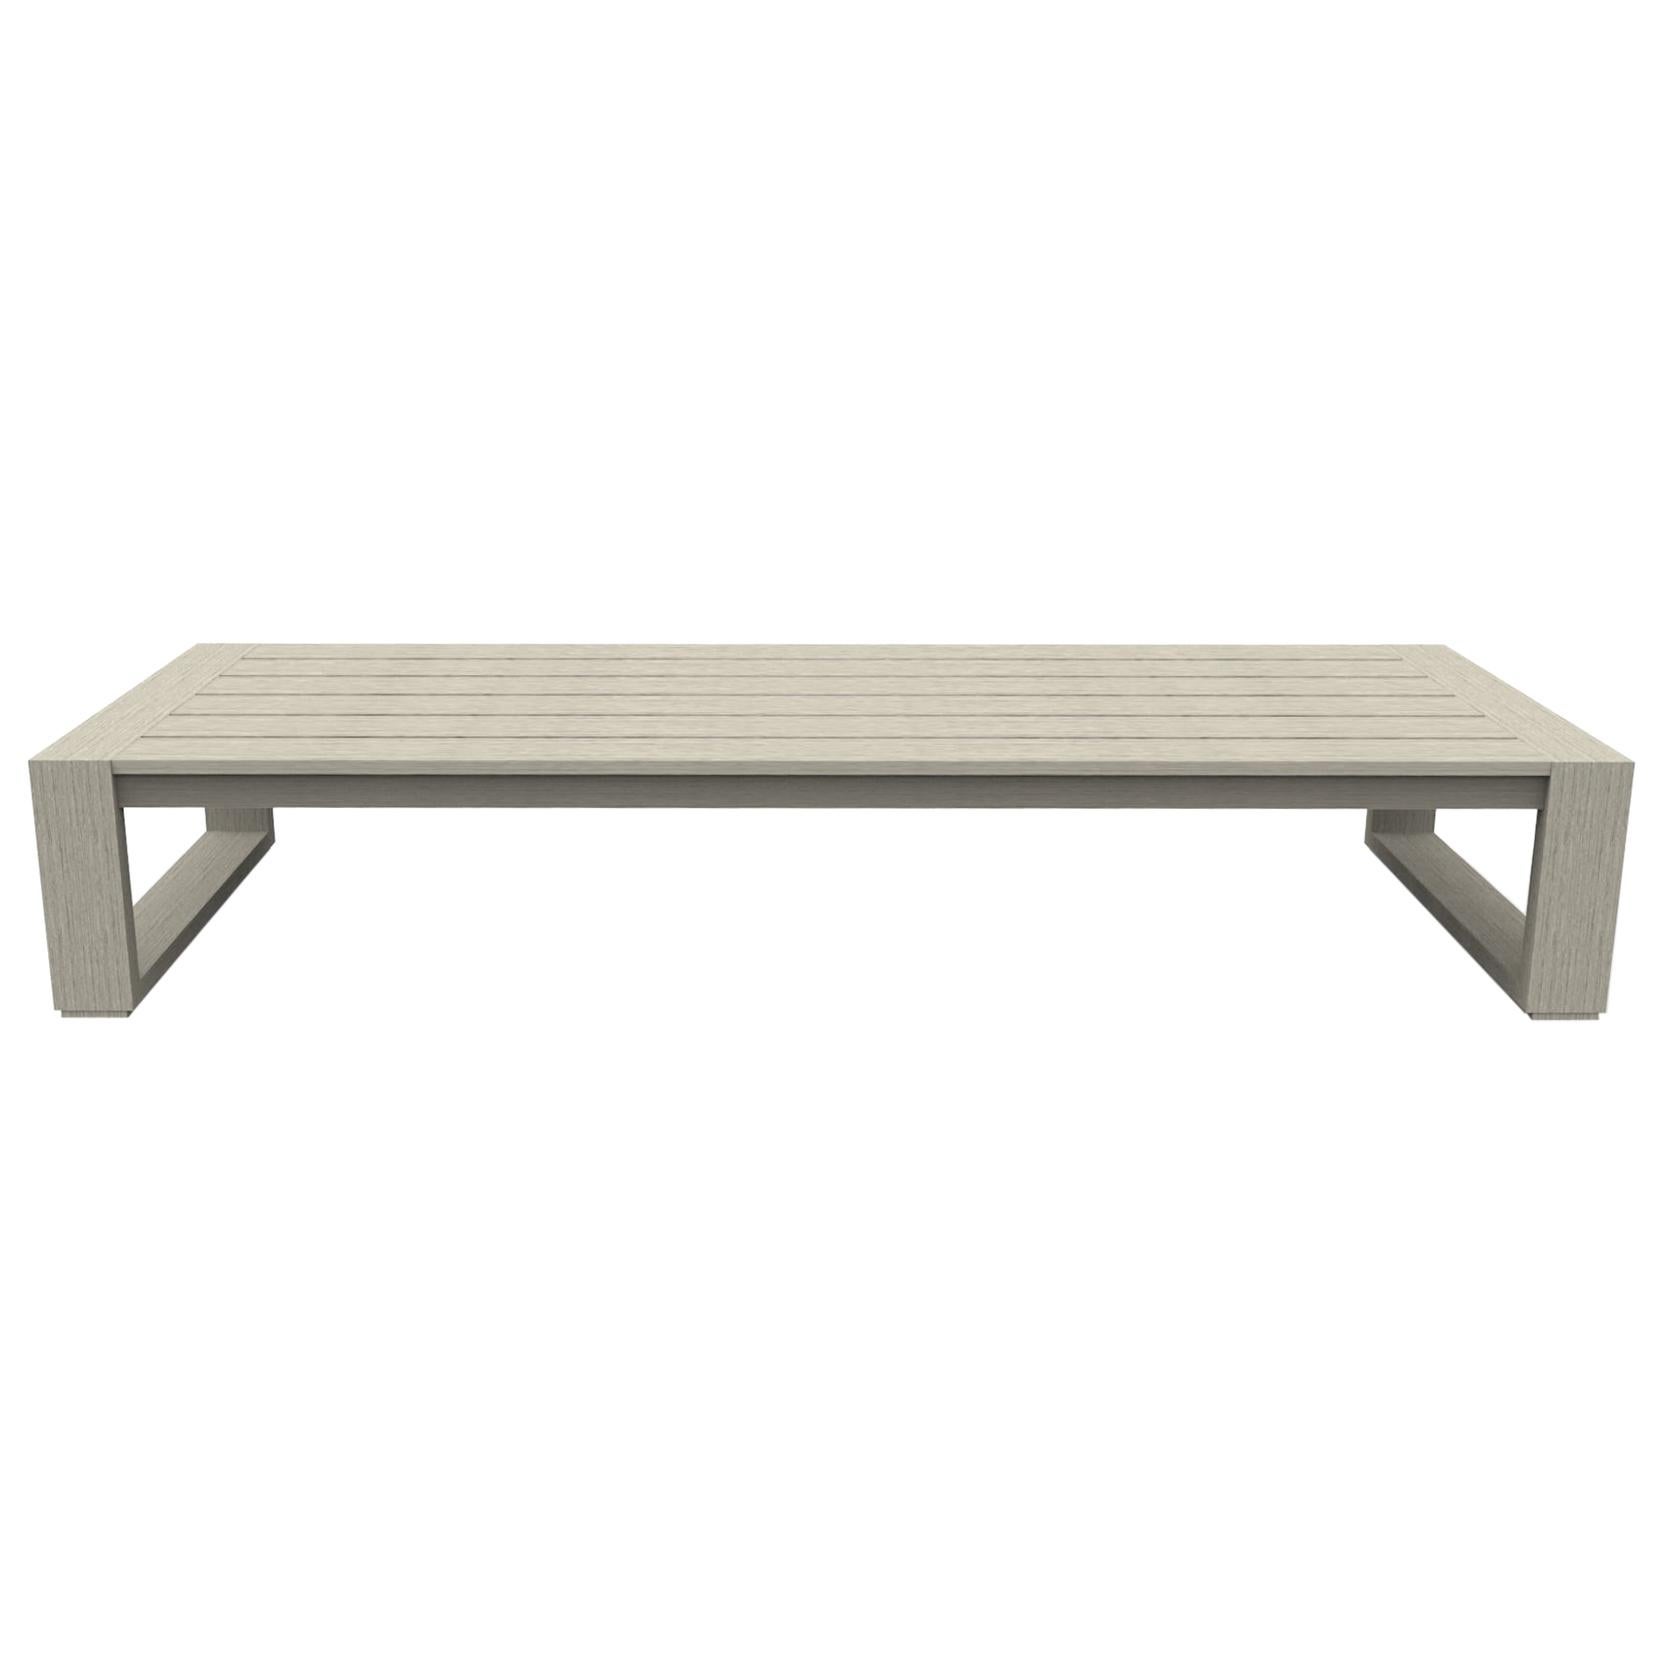 Brixton Teak Coffee Table 'Grade A' Wire Brushed Weathered Gray For Sale